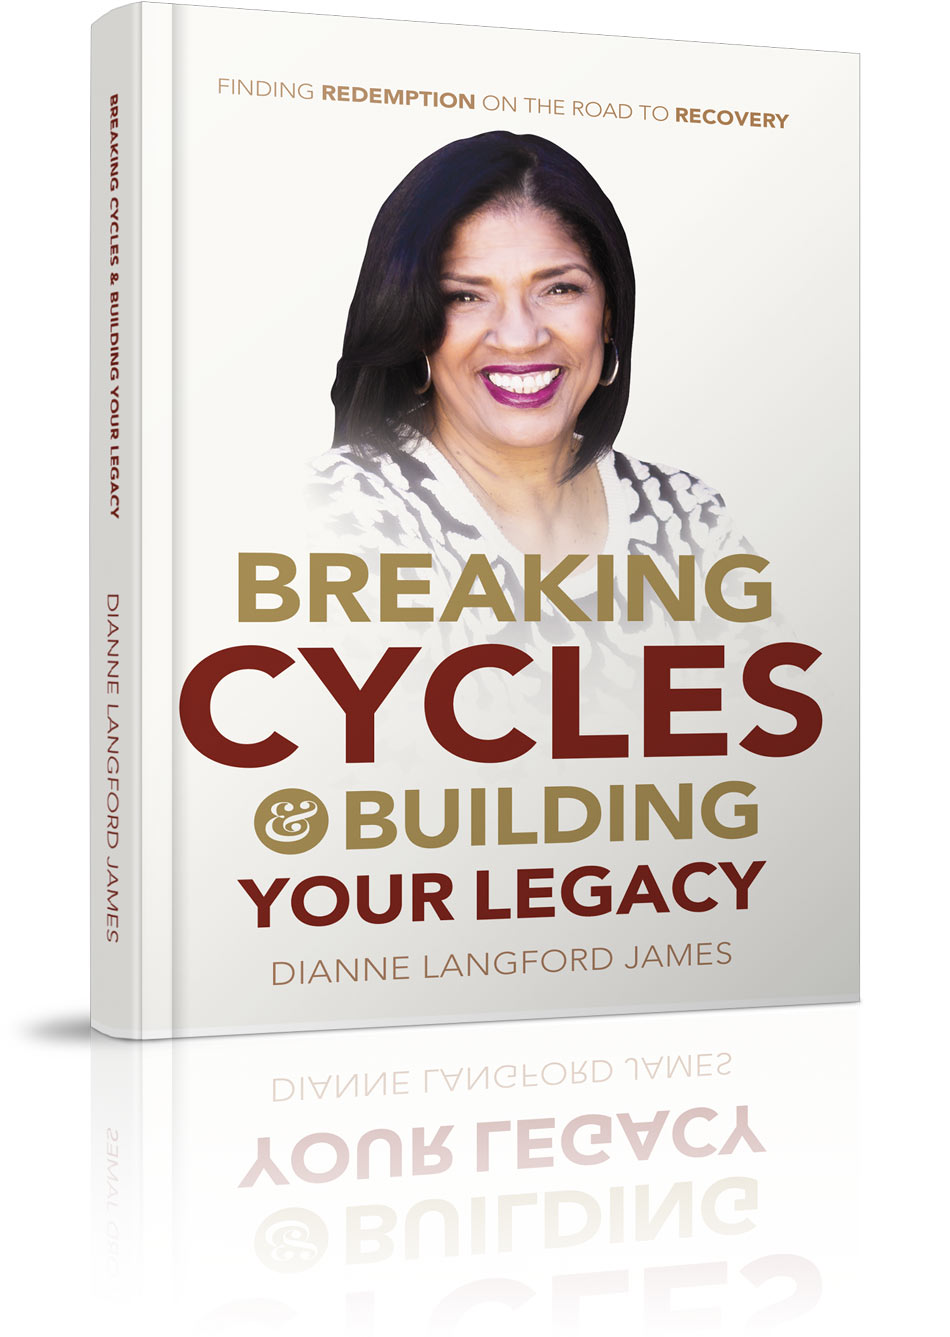 dianne-langford-james-breaking-cycles-building-your-legacy